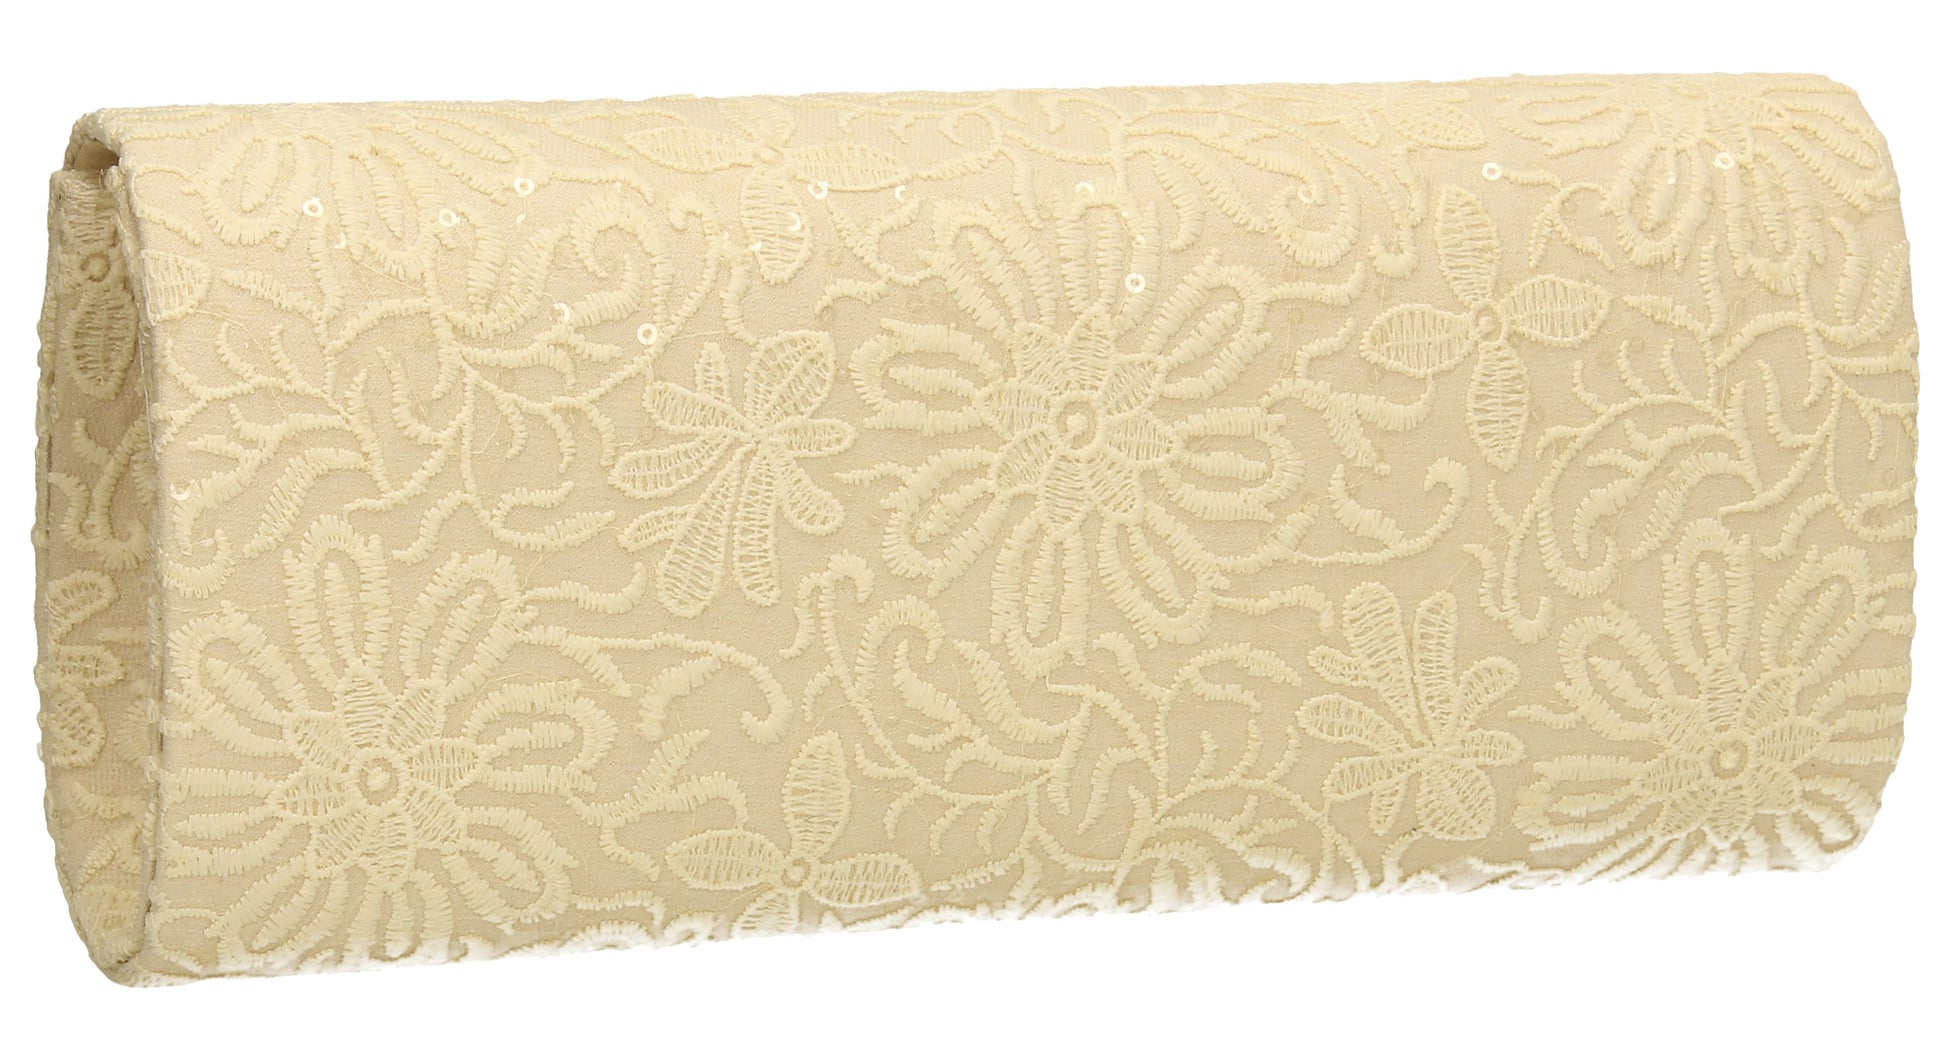 SWANKYSWANS Julia Lace Sequin Clutch Bag Ivory Cute Cheap Clutch Bag For Weddings School and Work